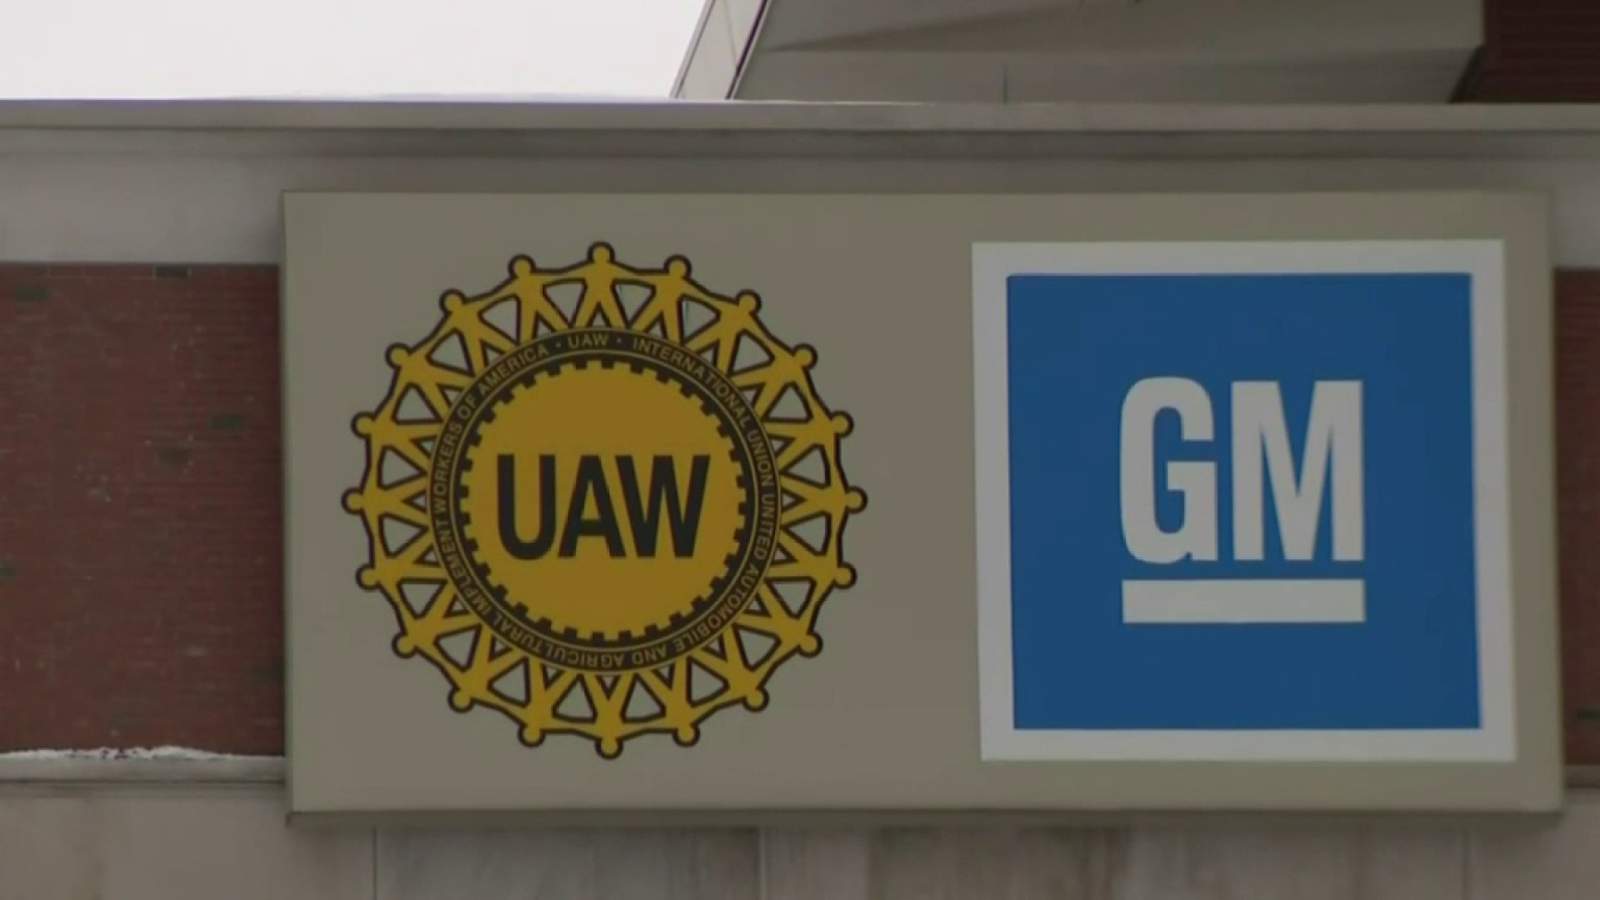 UAW announces ethics reform while under federal probe